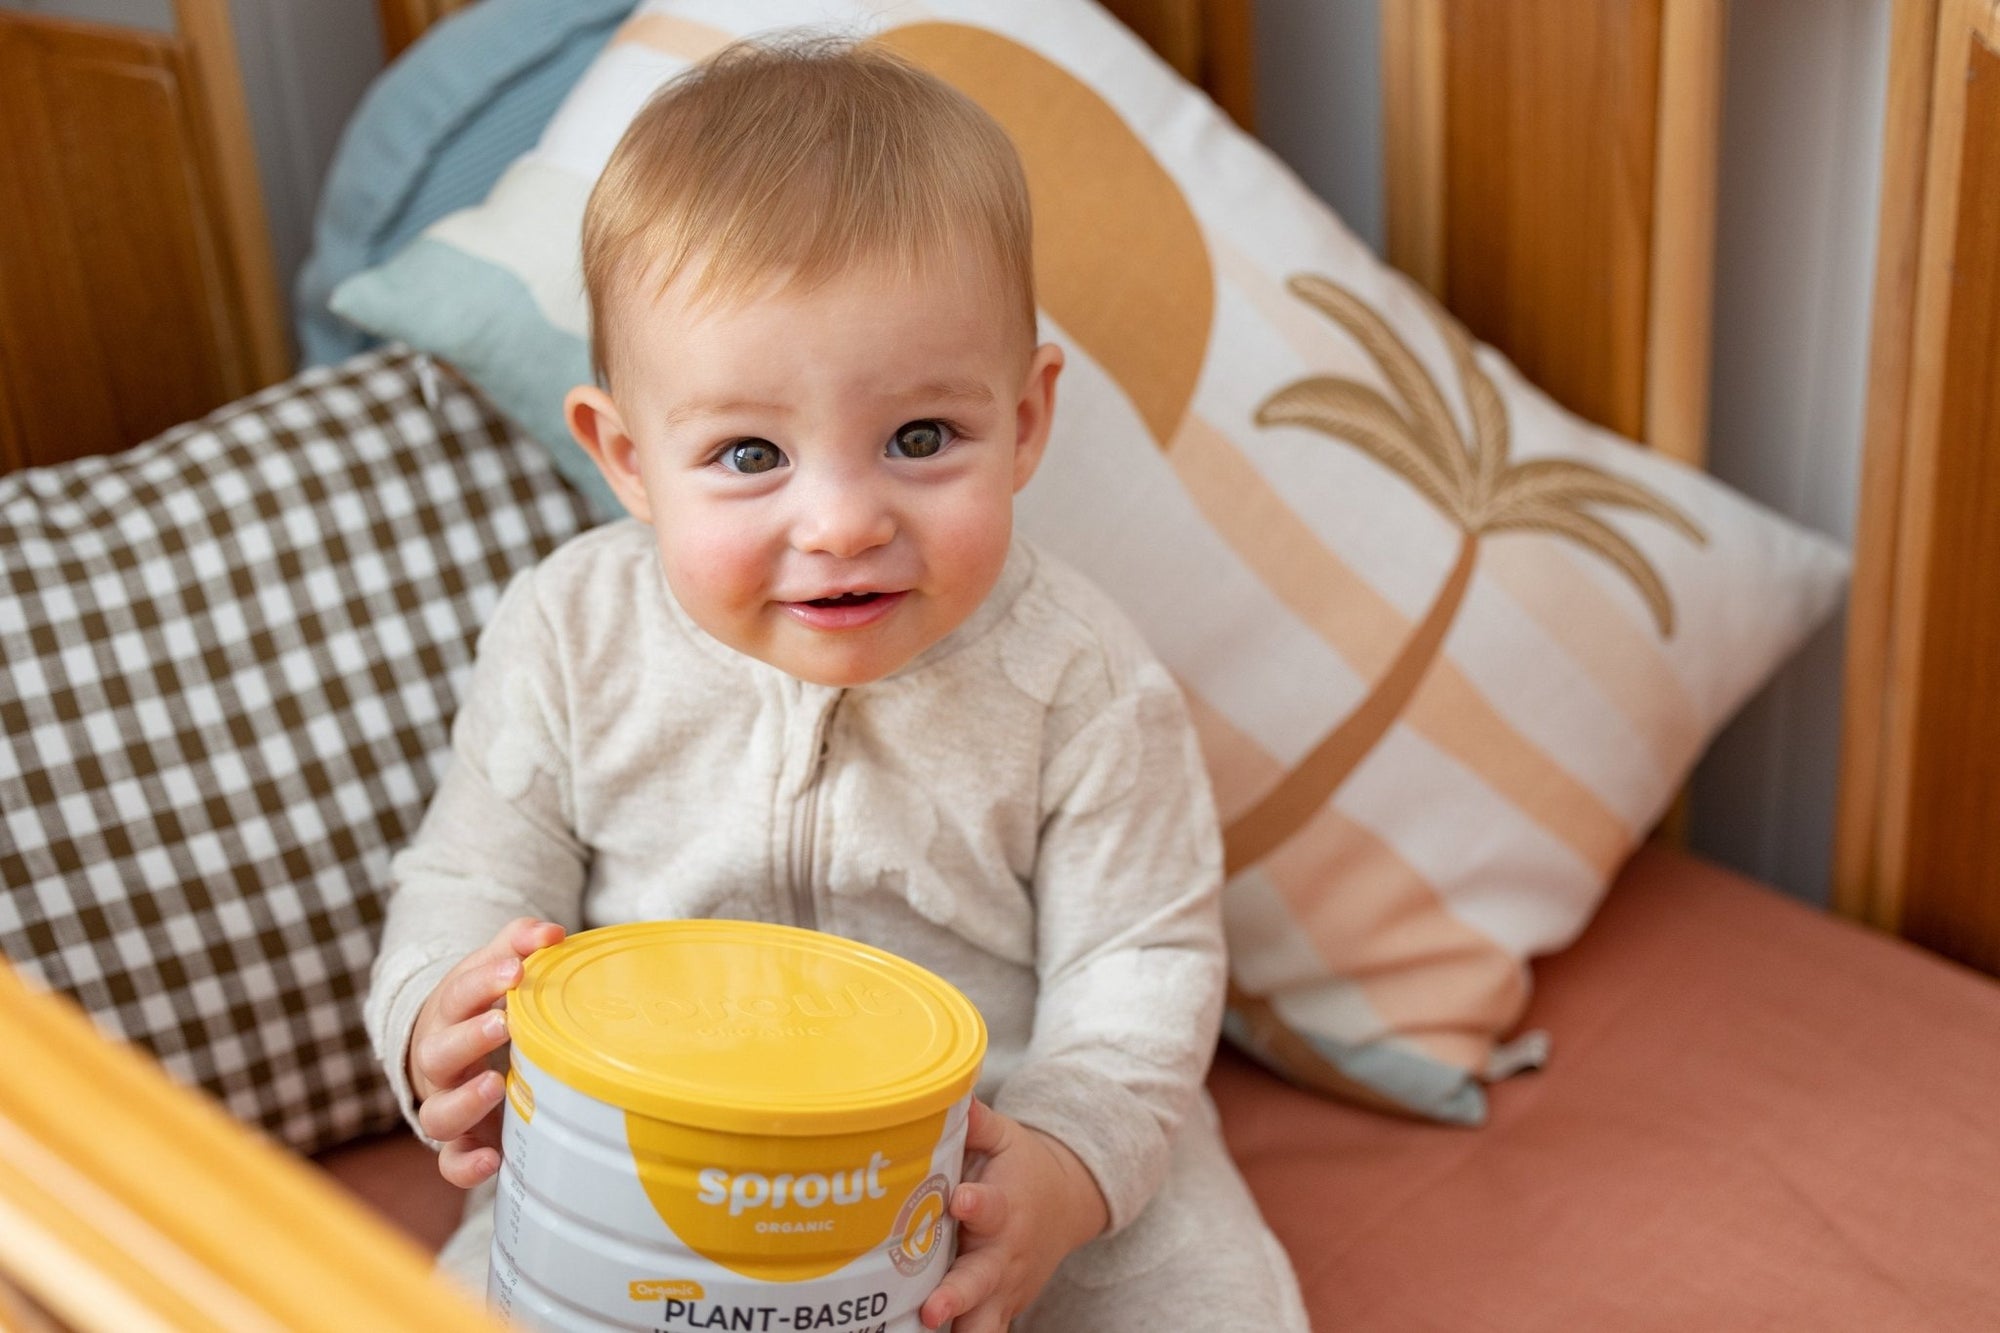 Queensland company behind world’s first vegan infant formula launches crowdfunding campaign - Sprout Organic